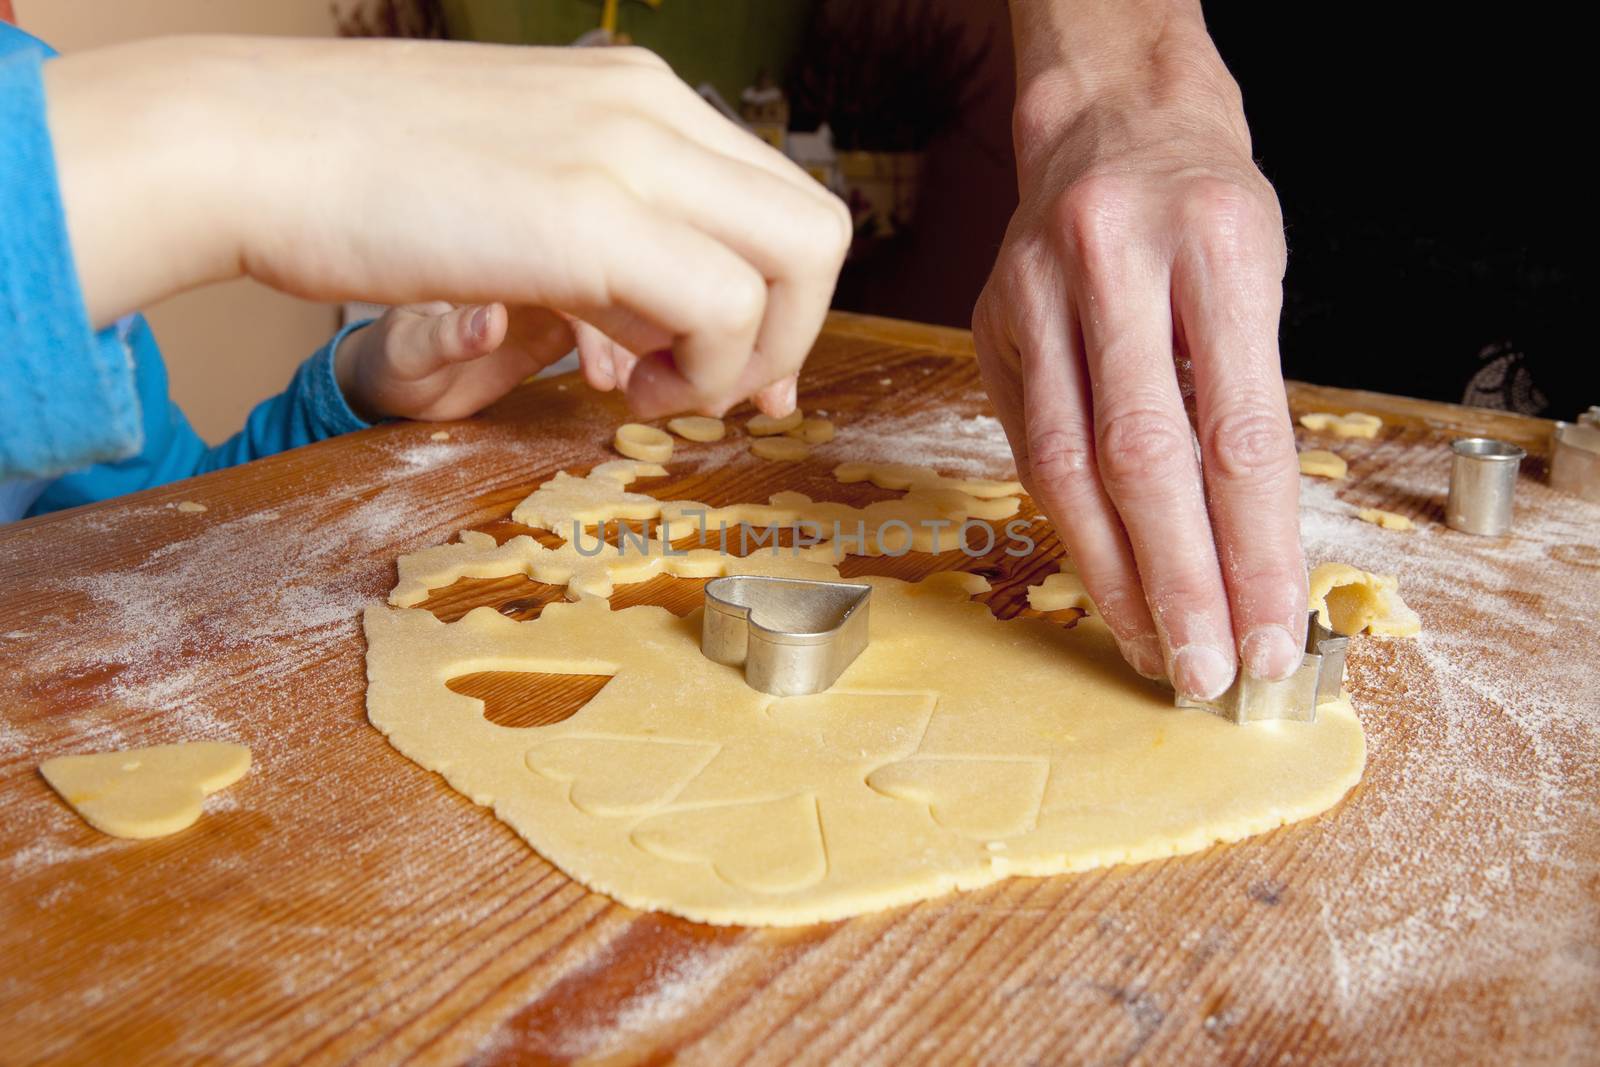 Traditional Czech Christmas Baking - Shaping Dough with Forms